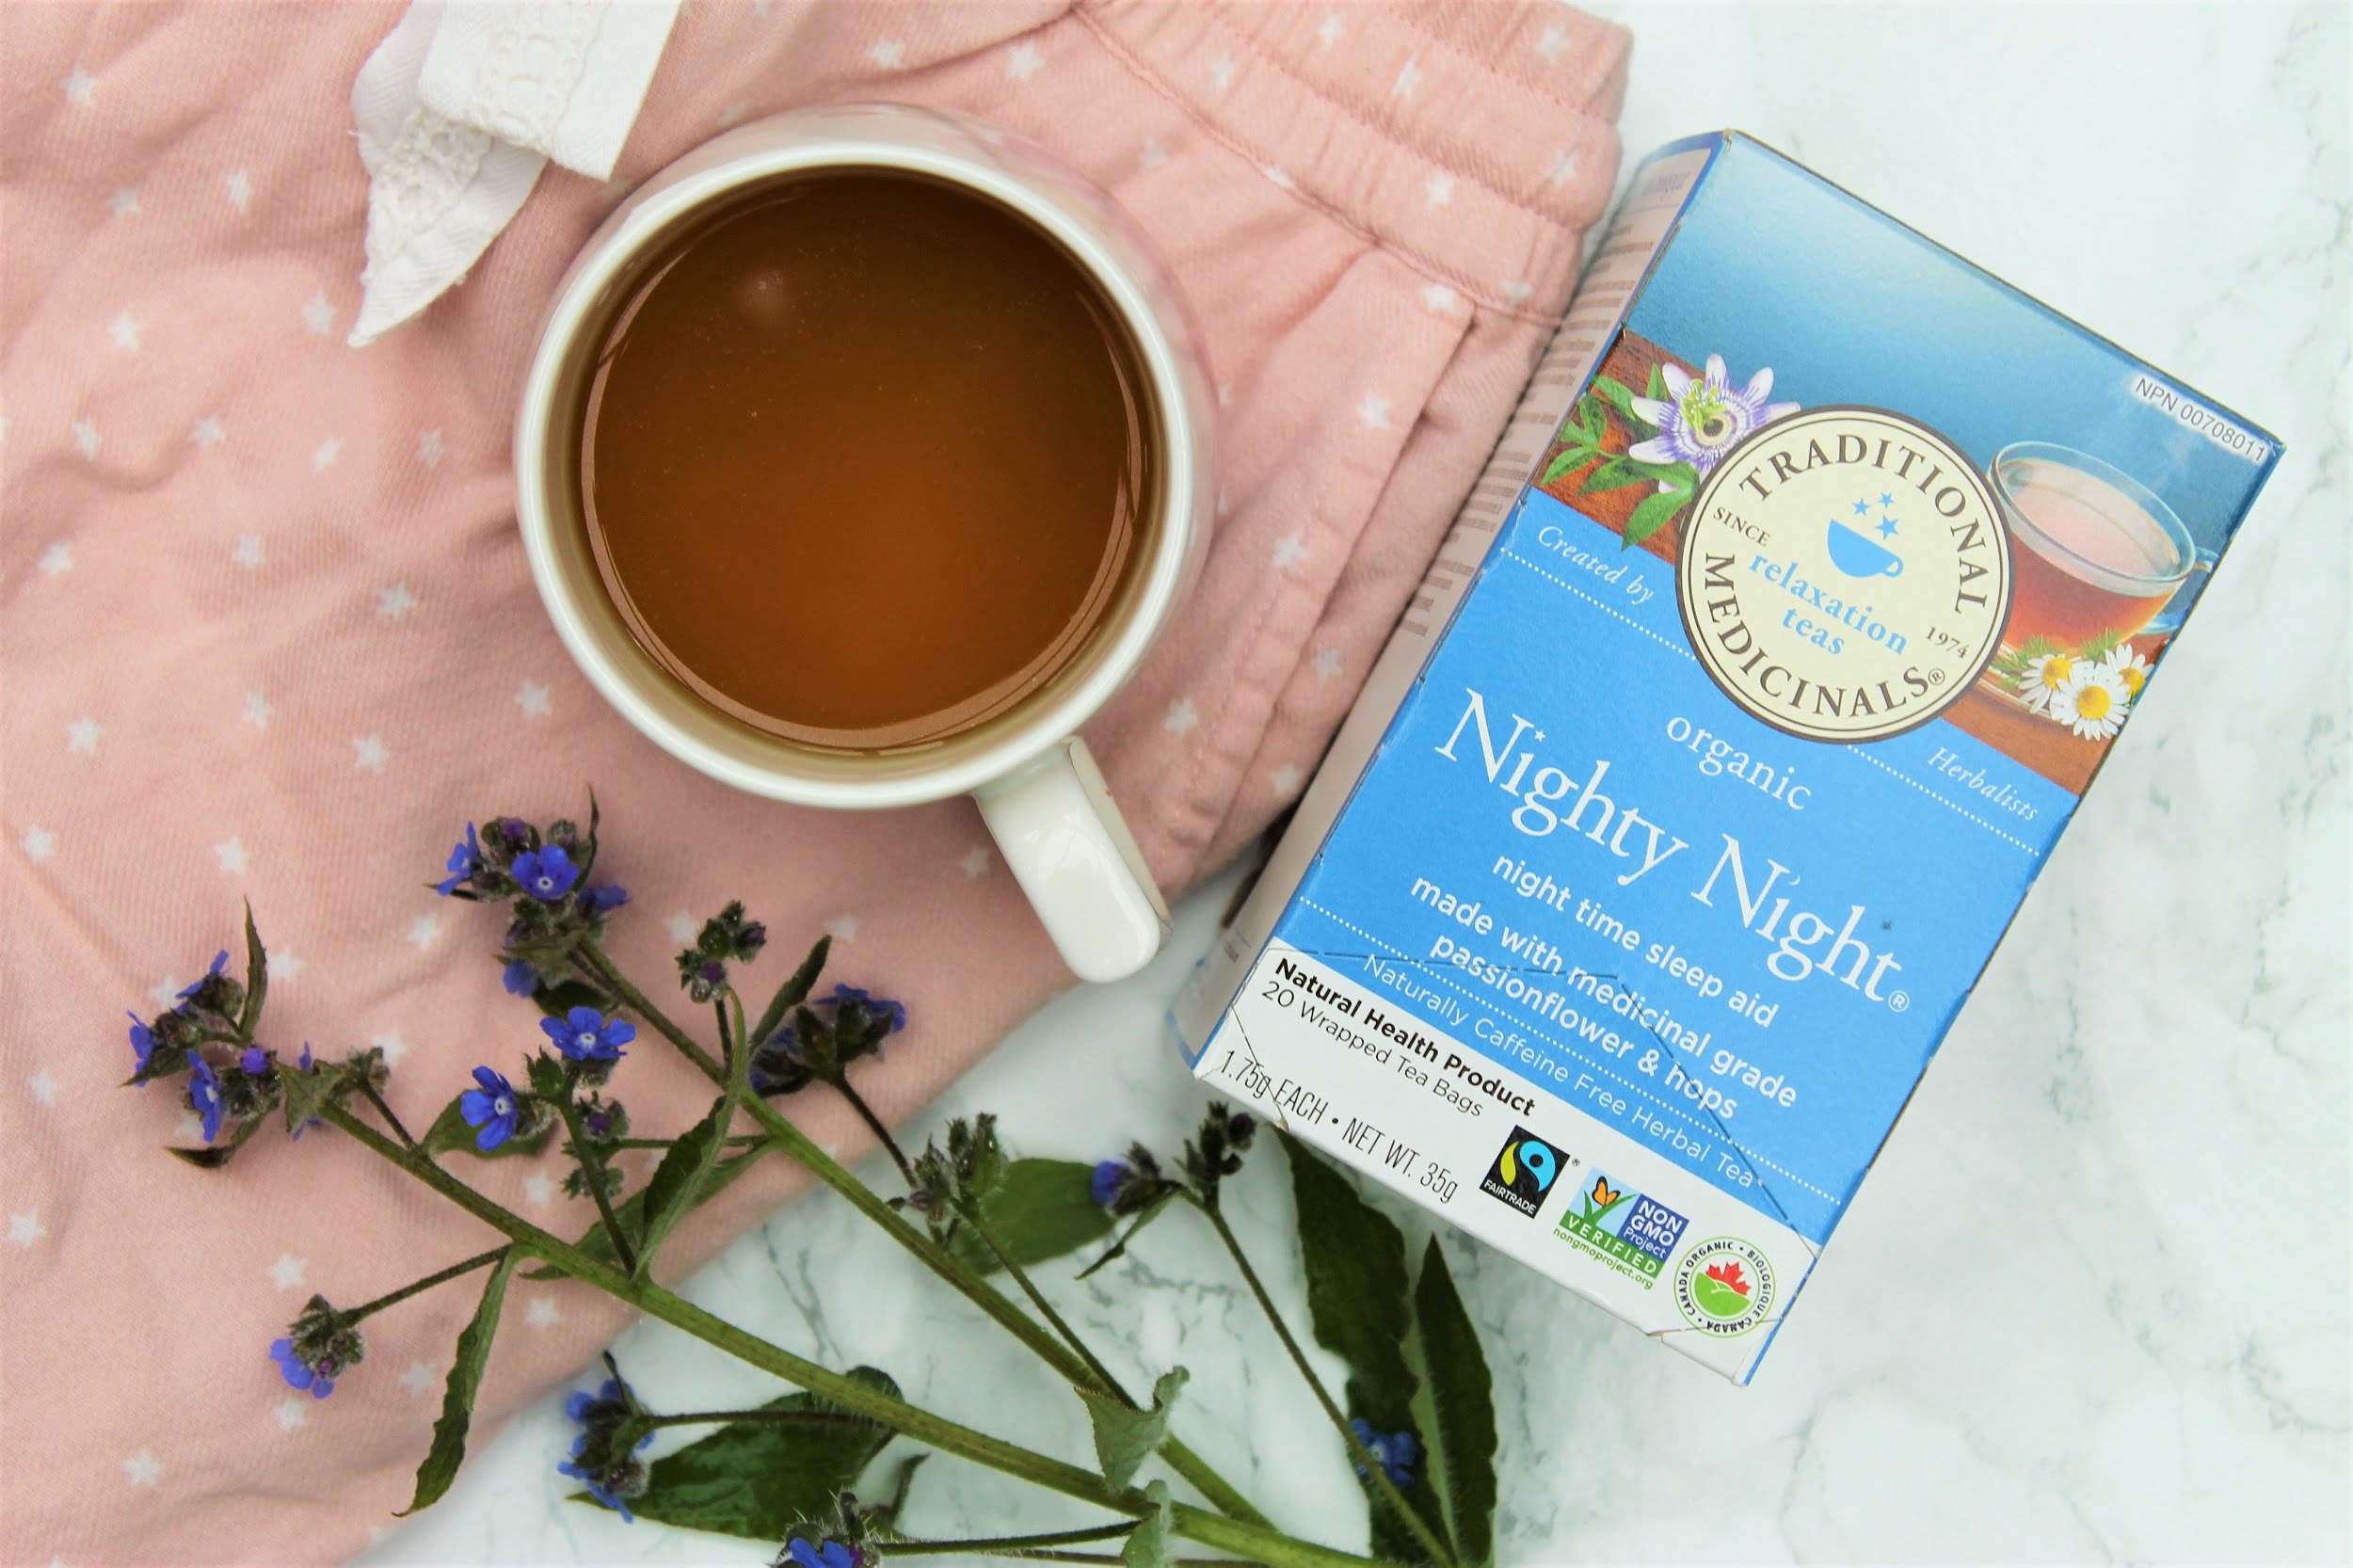 Traditional Medicinals Nighty Night Tea Review